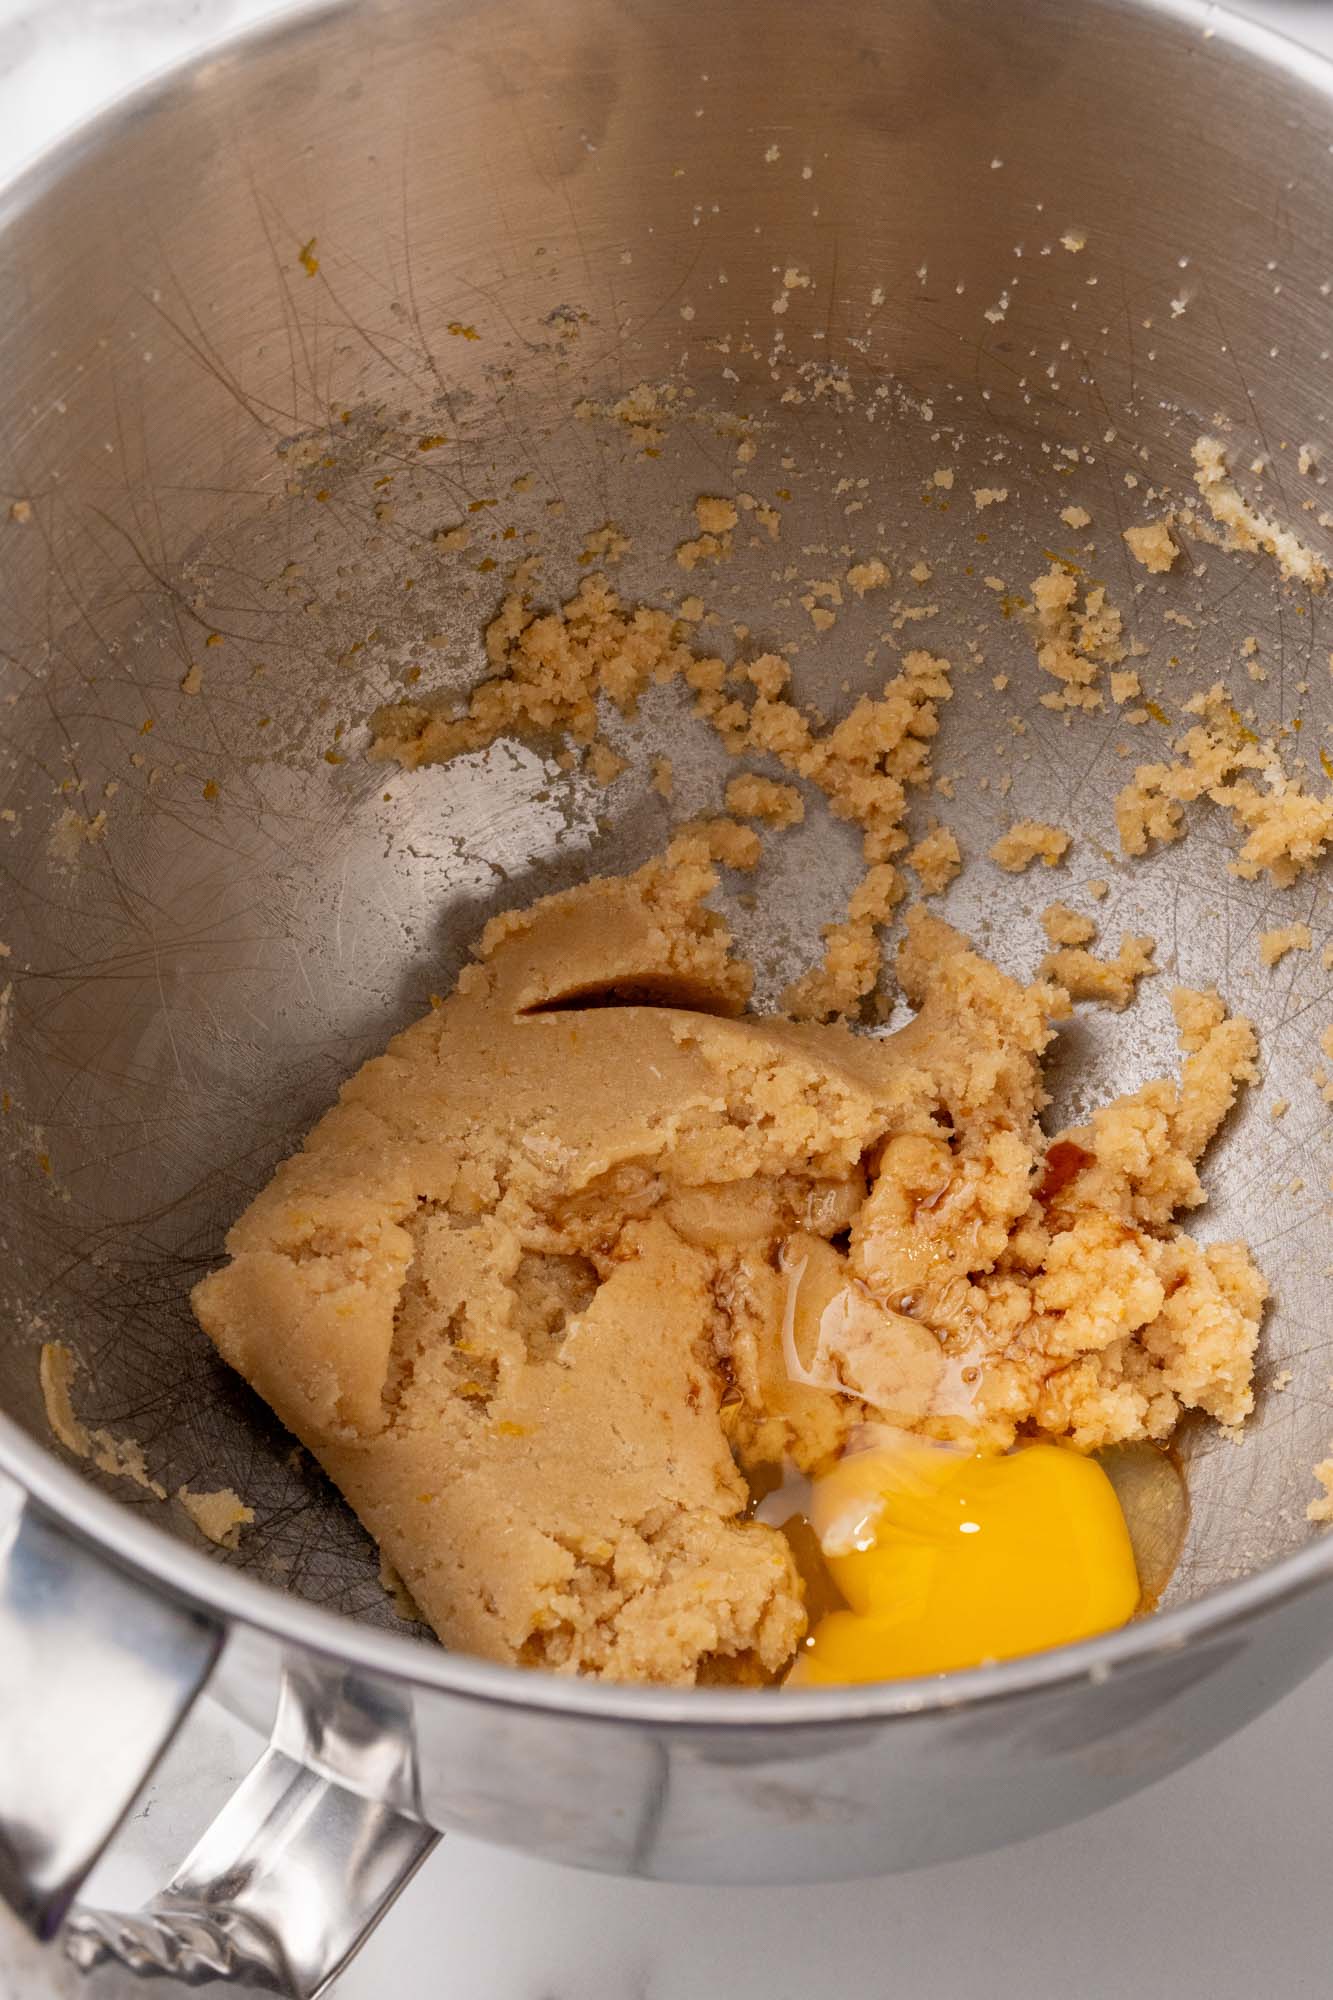 butter and brown sugar creamed together in a metal mixing bowl. An egg is added.